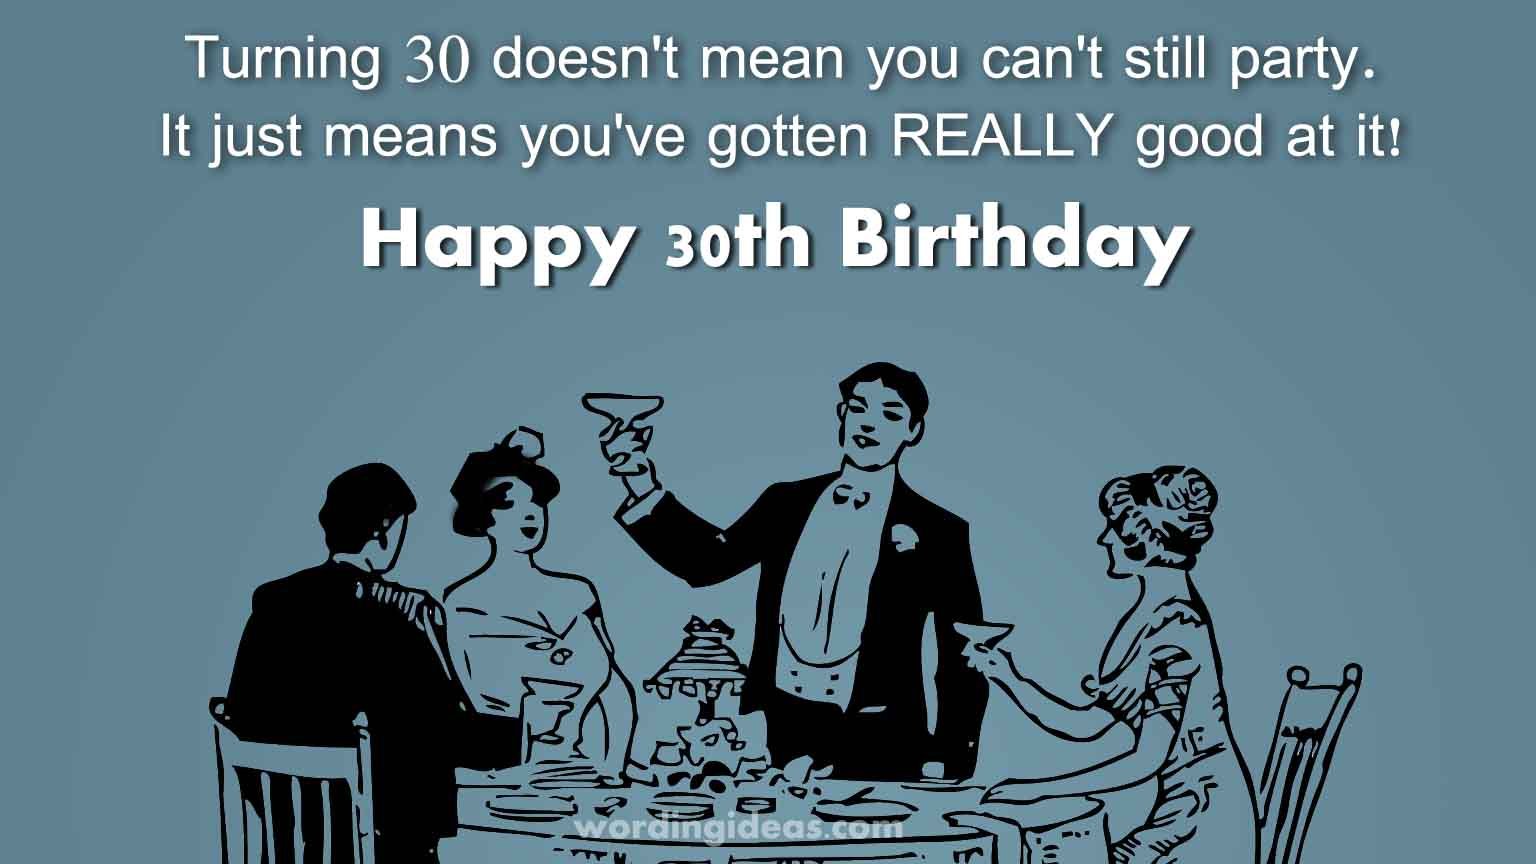 How to Wish Someone a Happy 30th Birthday » Wording Ideas